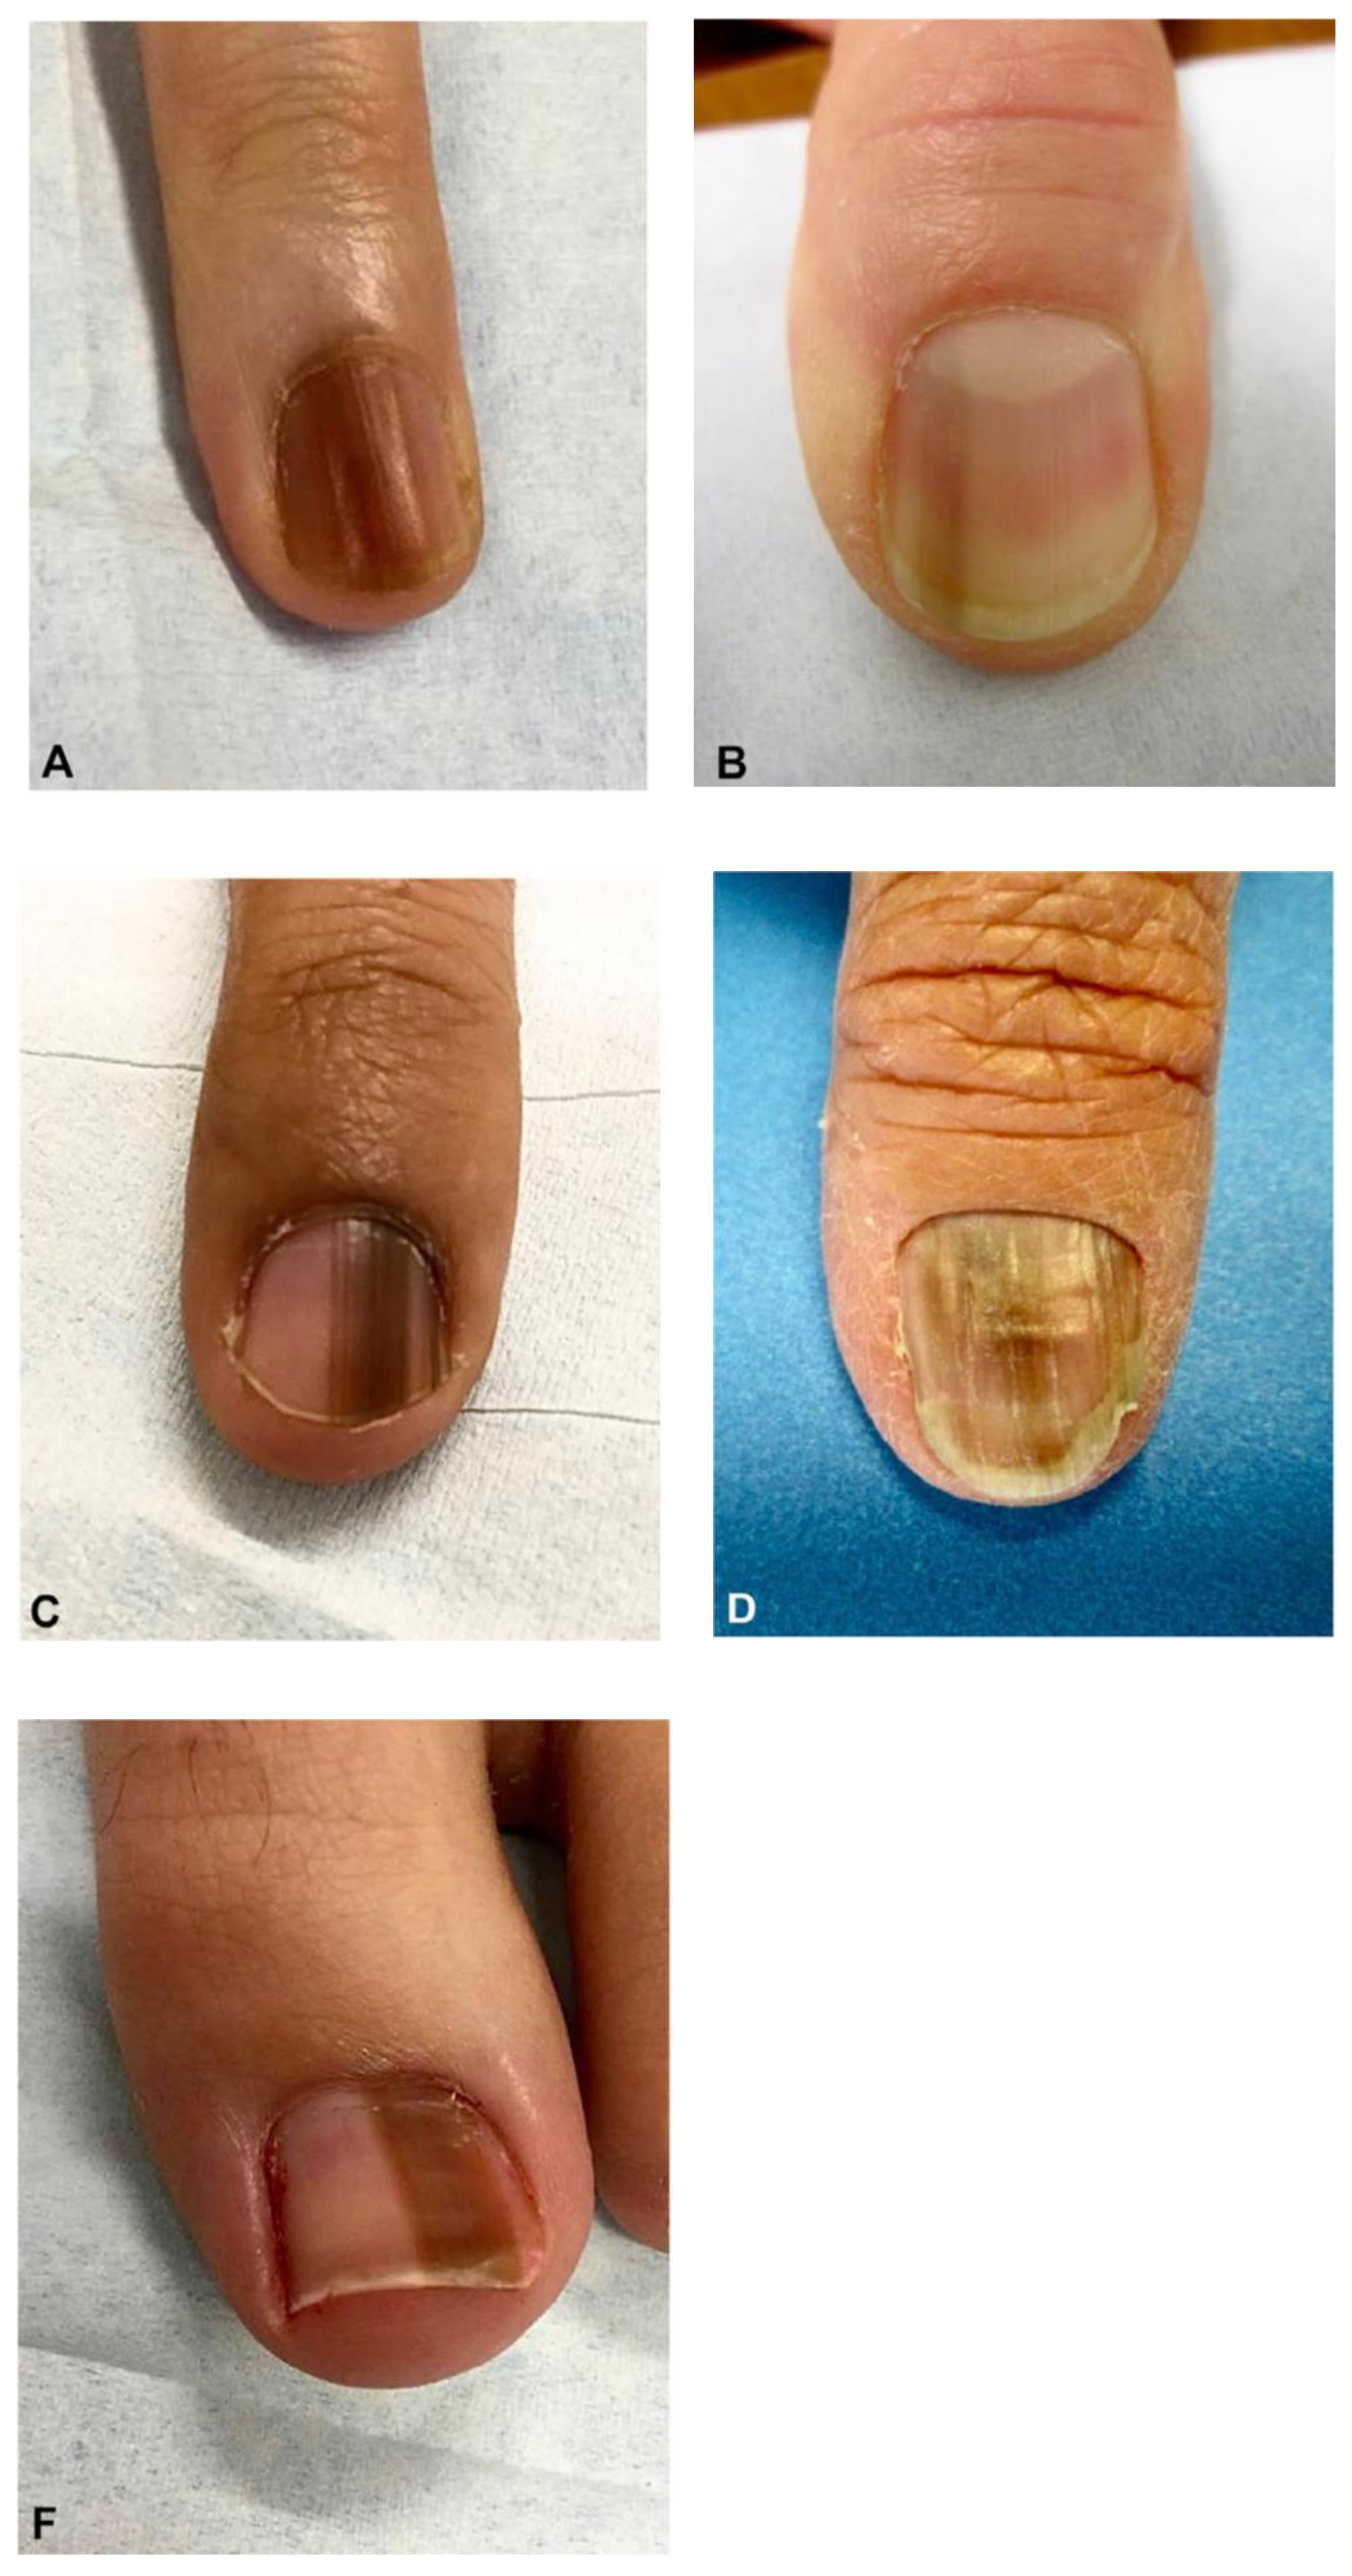 RACGP - Pigmented lesions of the nail bed – Clinical assessment